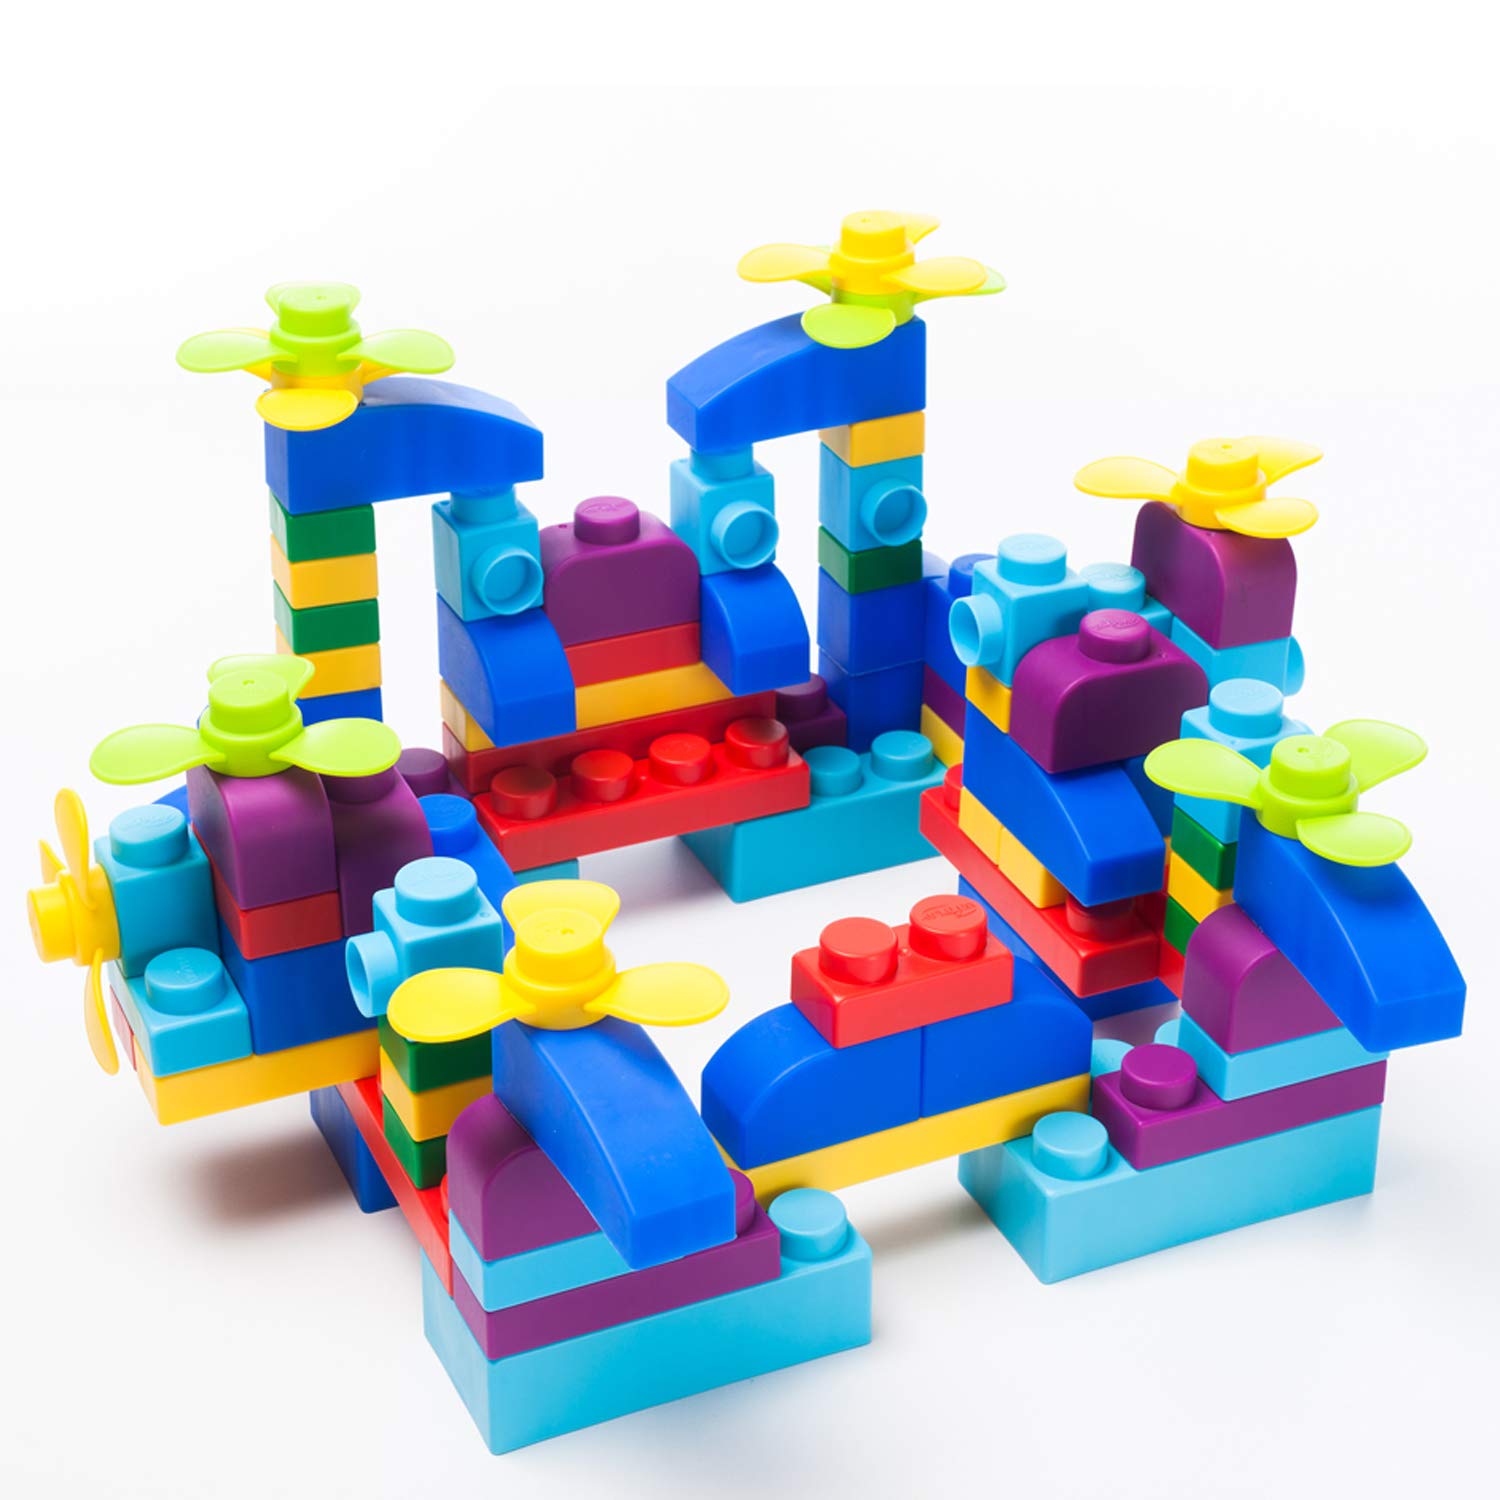 UNiPLAY Plus Soft Building Blocks Creativity Toy Educational Play Cognitive Development Early Learning Stacking Blocks